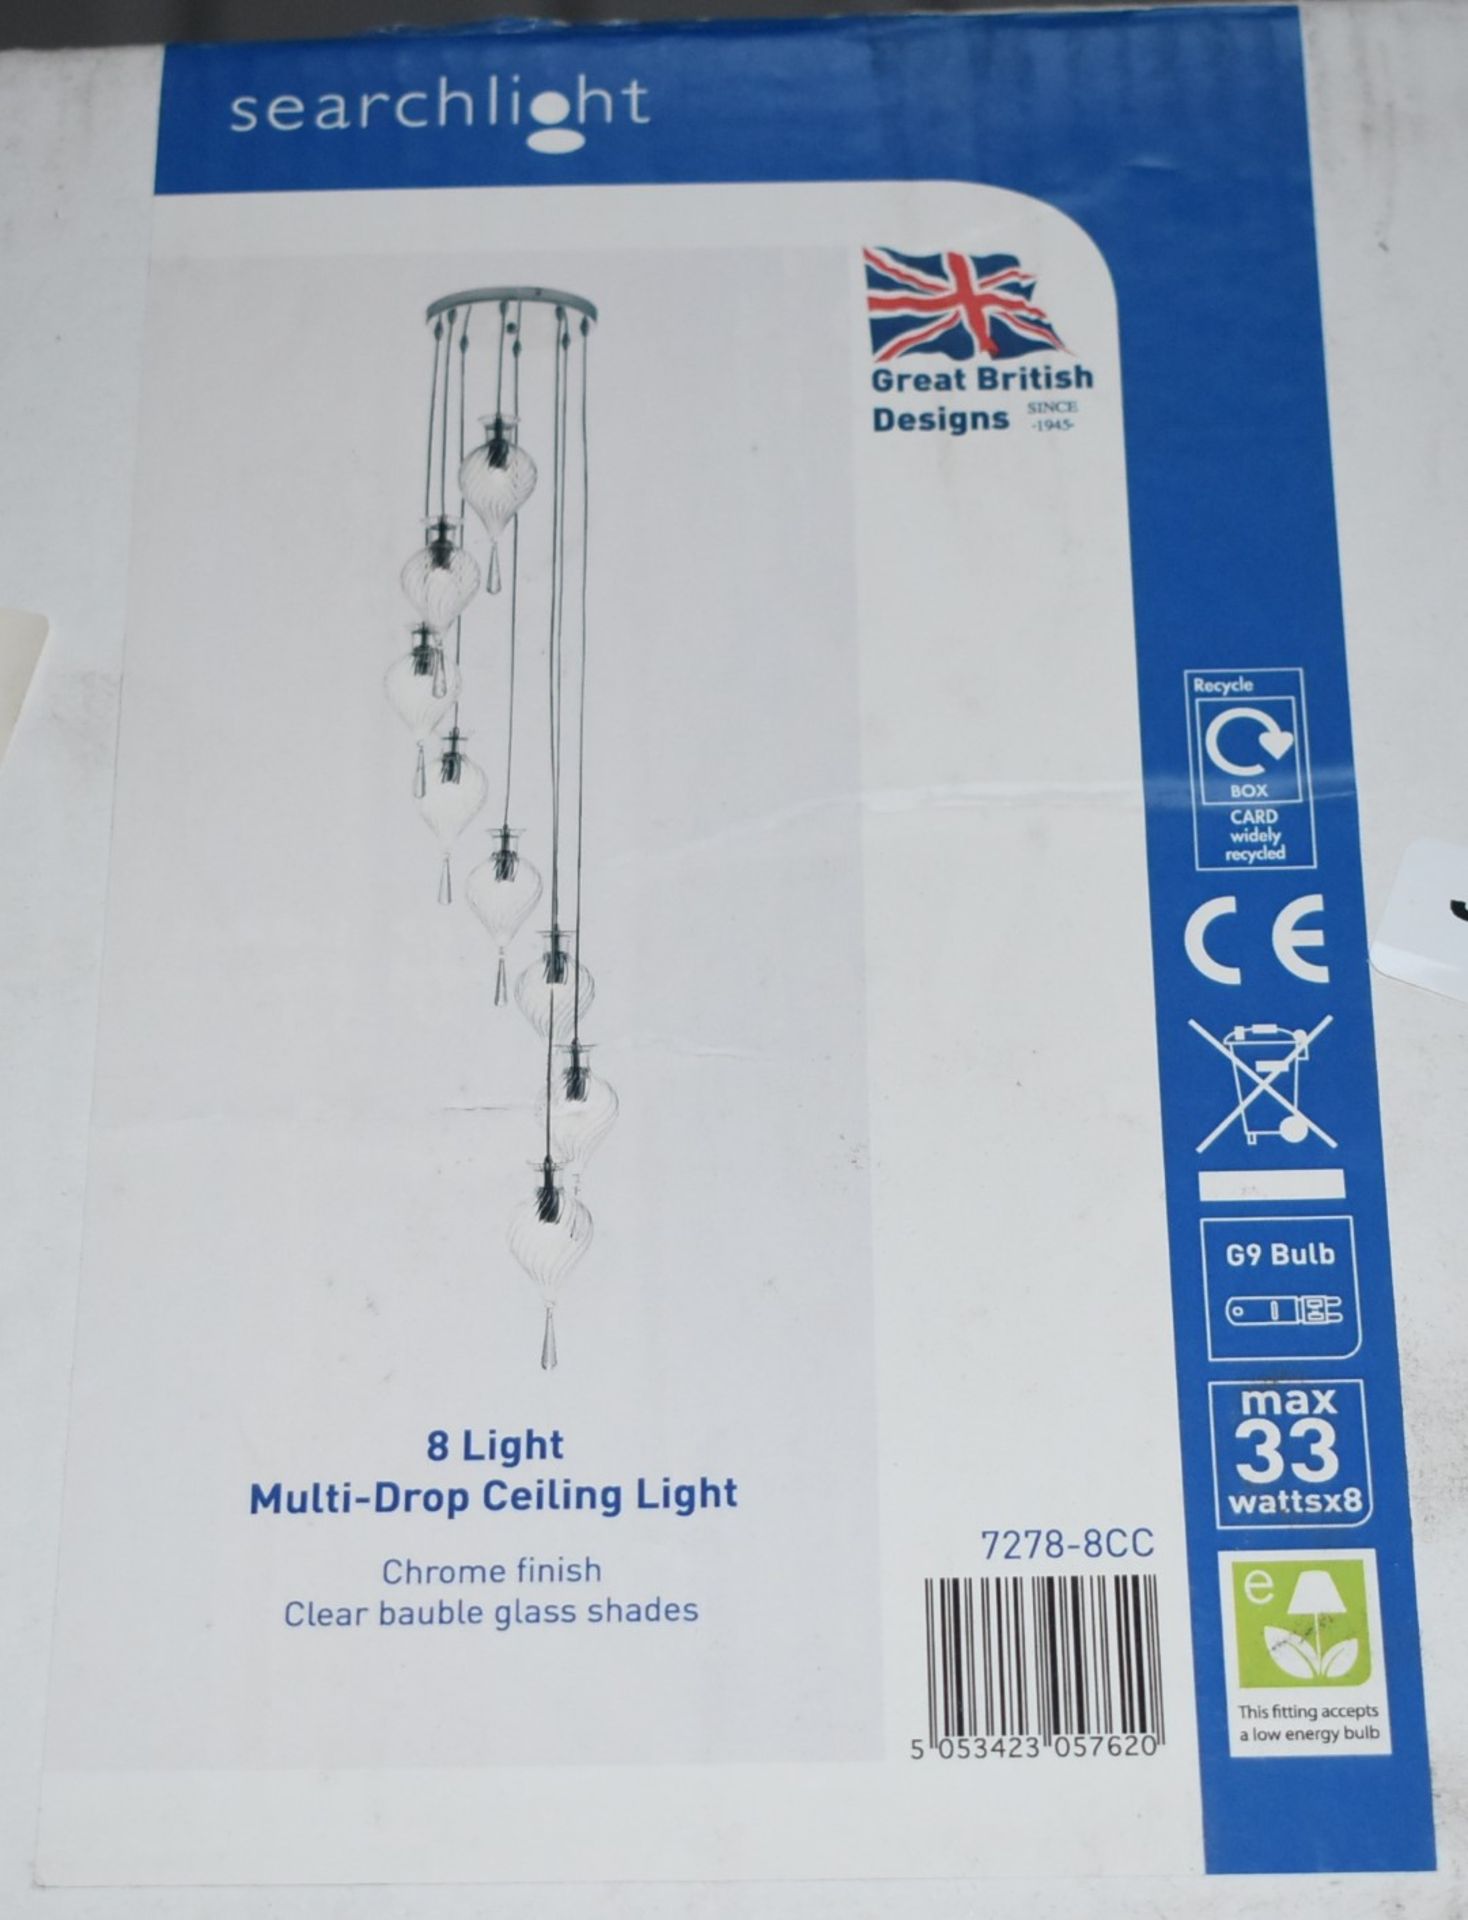 1 x Searchlight Twirls 8 Light Multi Drop Ceiling Light - Chrome Finish With Clear Bauble Glass - Image 3 of 3